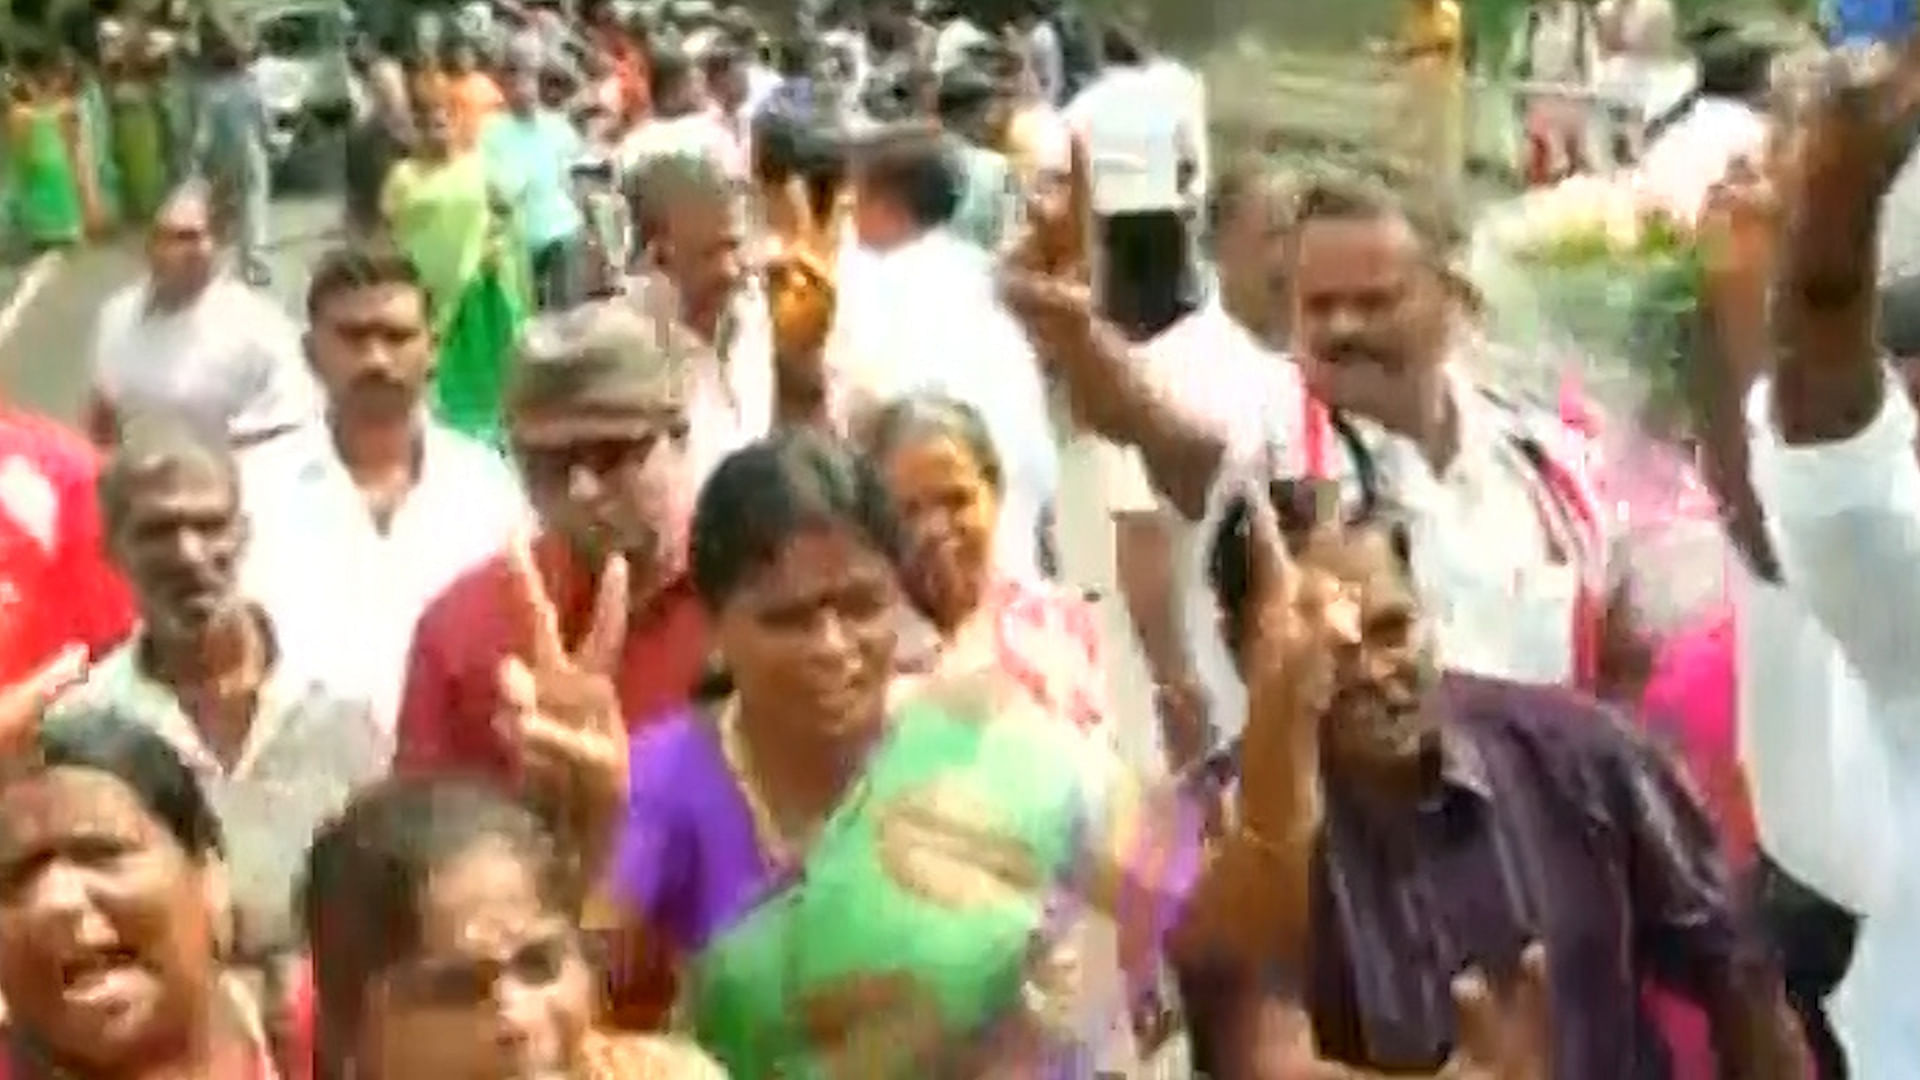 AIADMK supporters broke out into celebrations outside AIADMK chief J Jayalalithaa’s Poes Garden residence. (Photo: ANI screengrab)